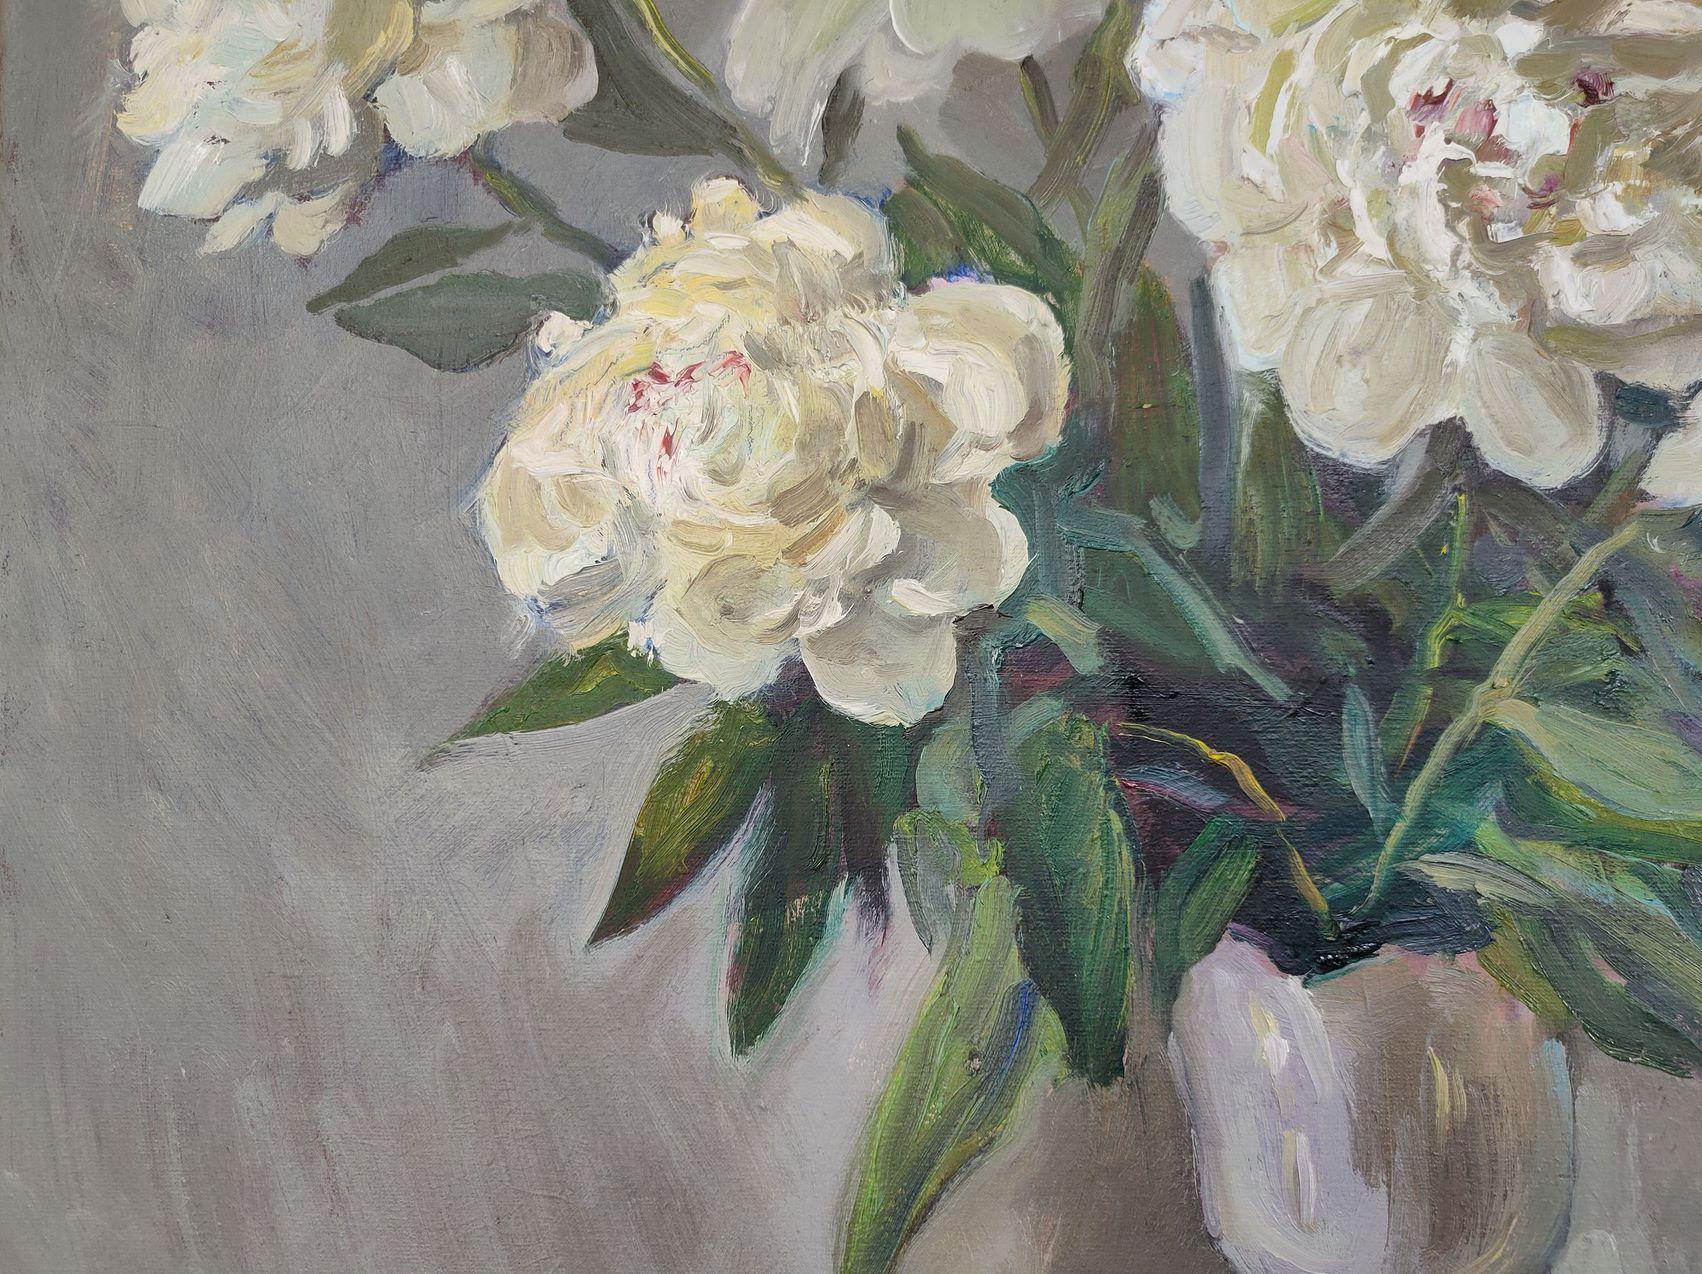 Artist: Mishurovski V.V.
Work: Original oil painting, handmade artwork, one of a kind 
Medium: Oil on Canvas
Style: Impressionism
Year: 2022
Title: White peonies on a silver background
Size: 27.5